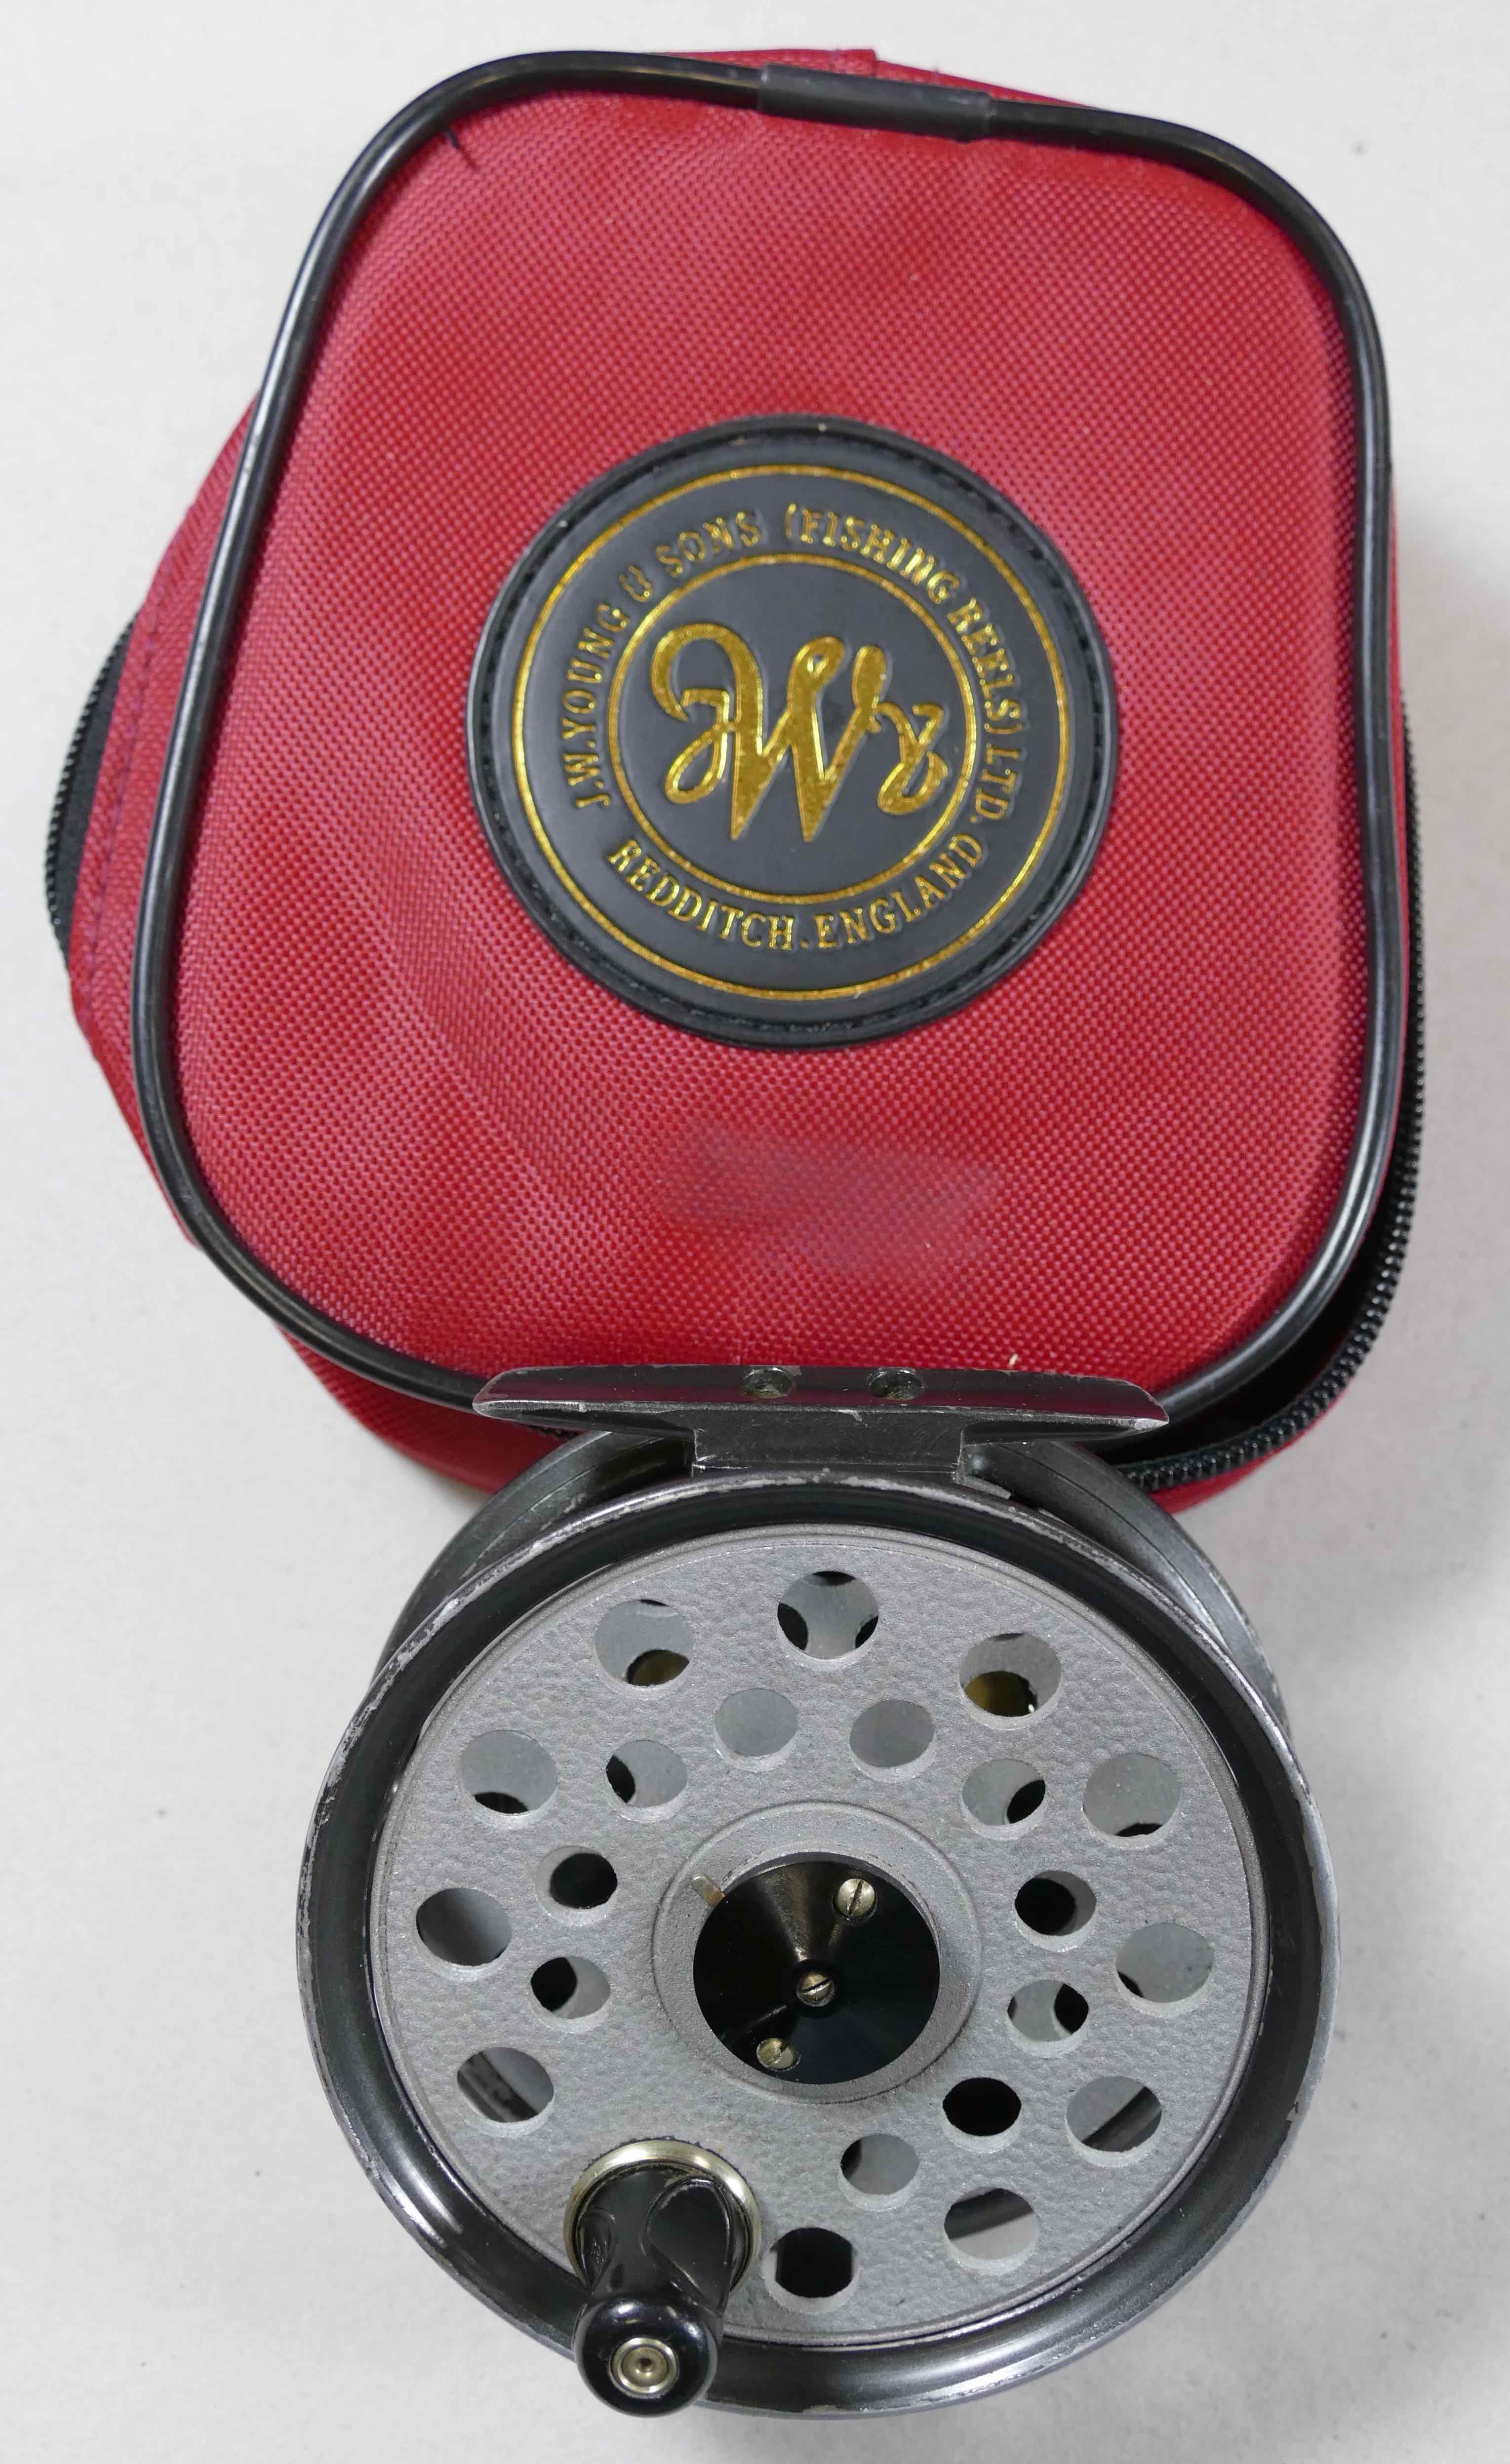 J. W. Young Pridex dual pawl fly reel in very good shape - $75.00